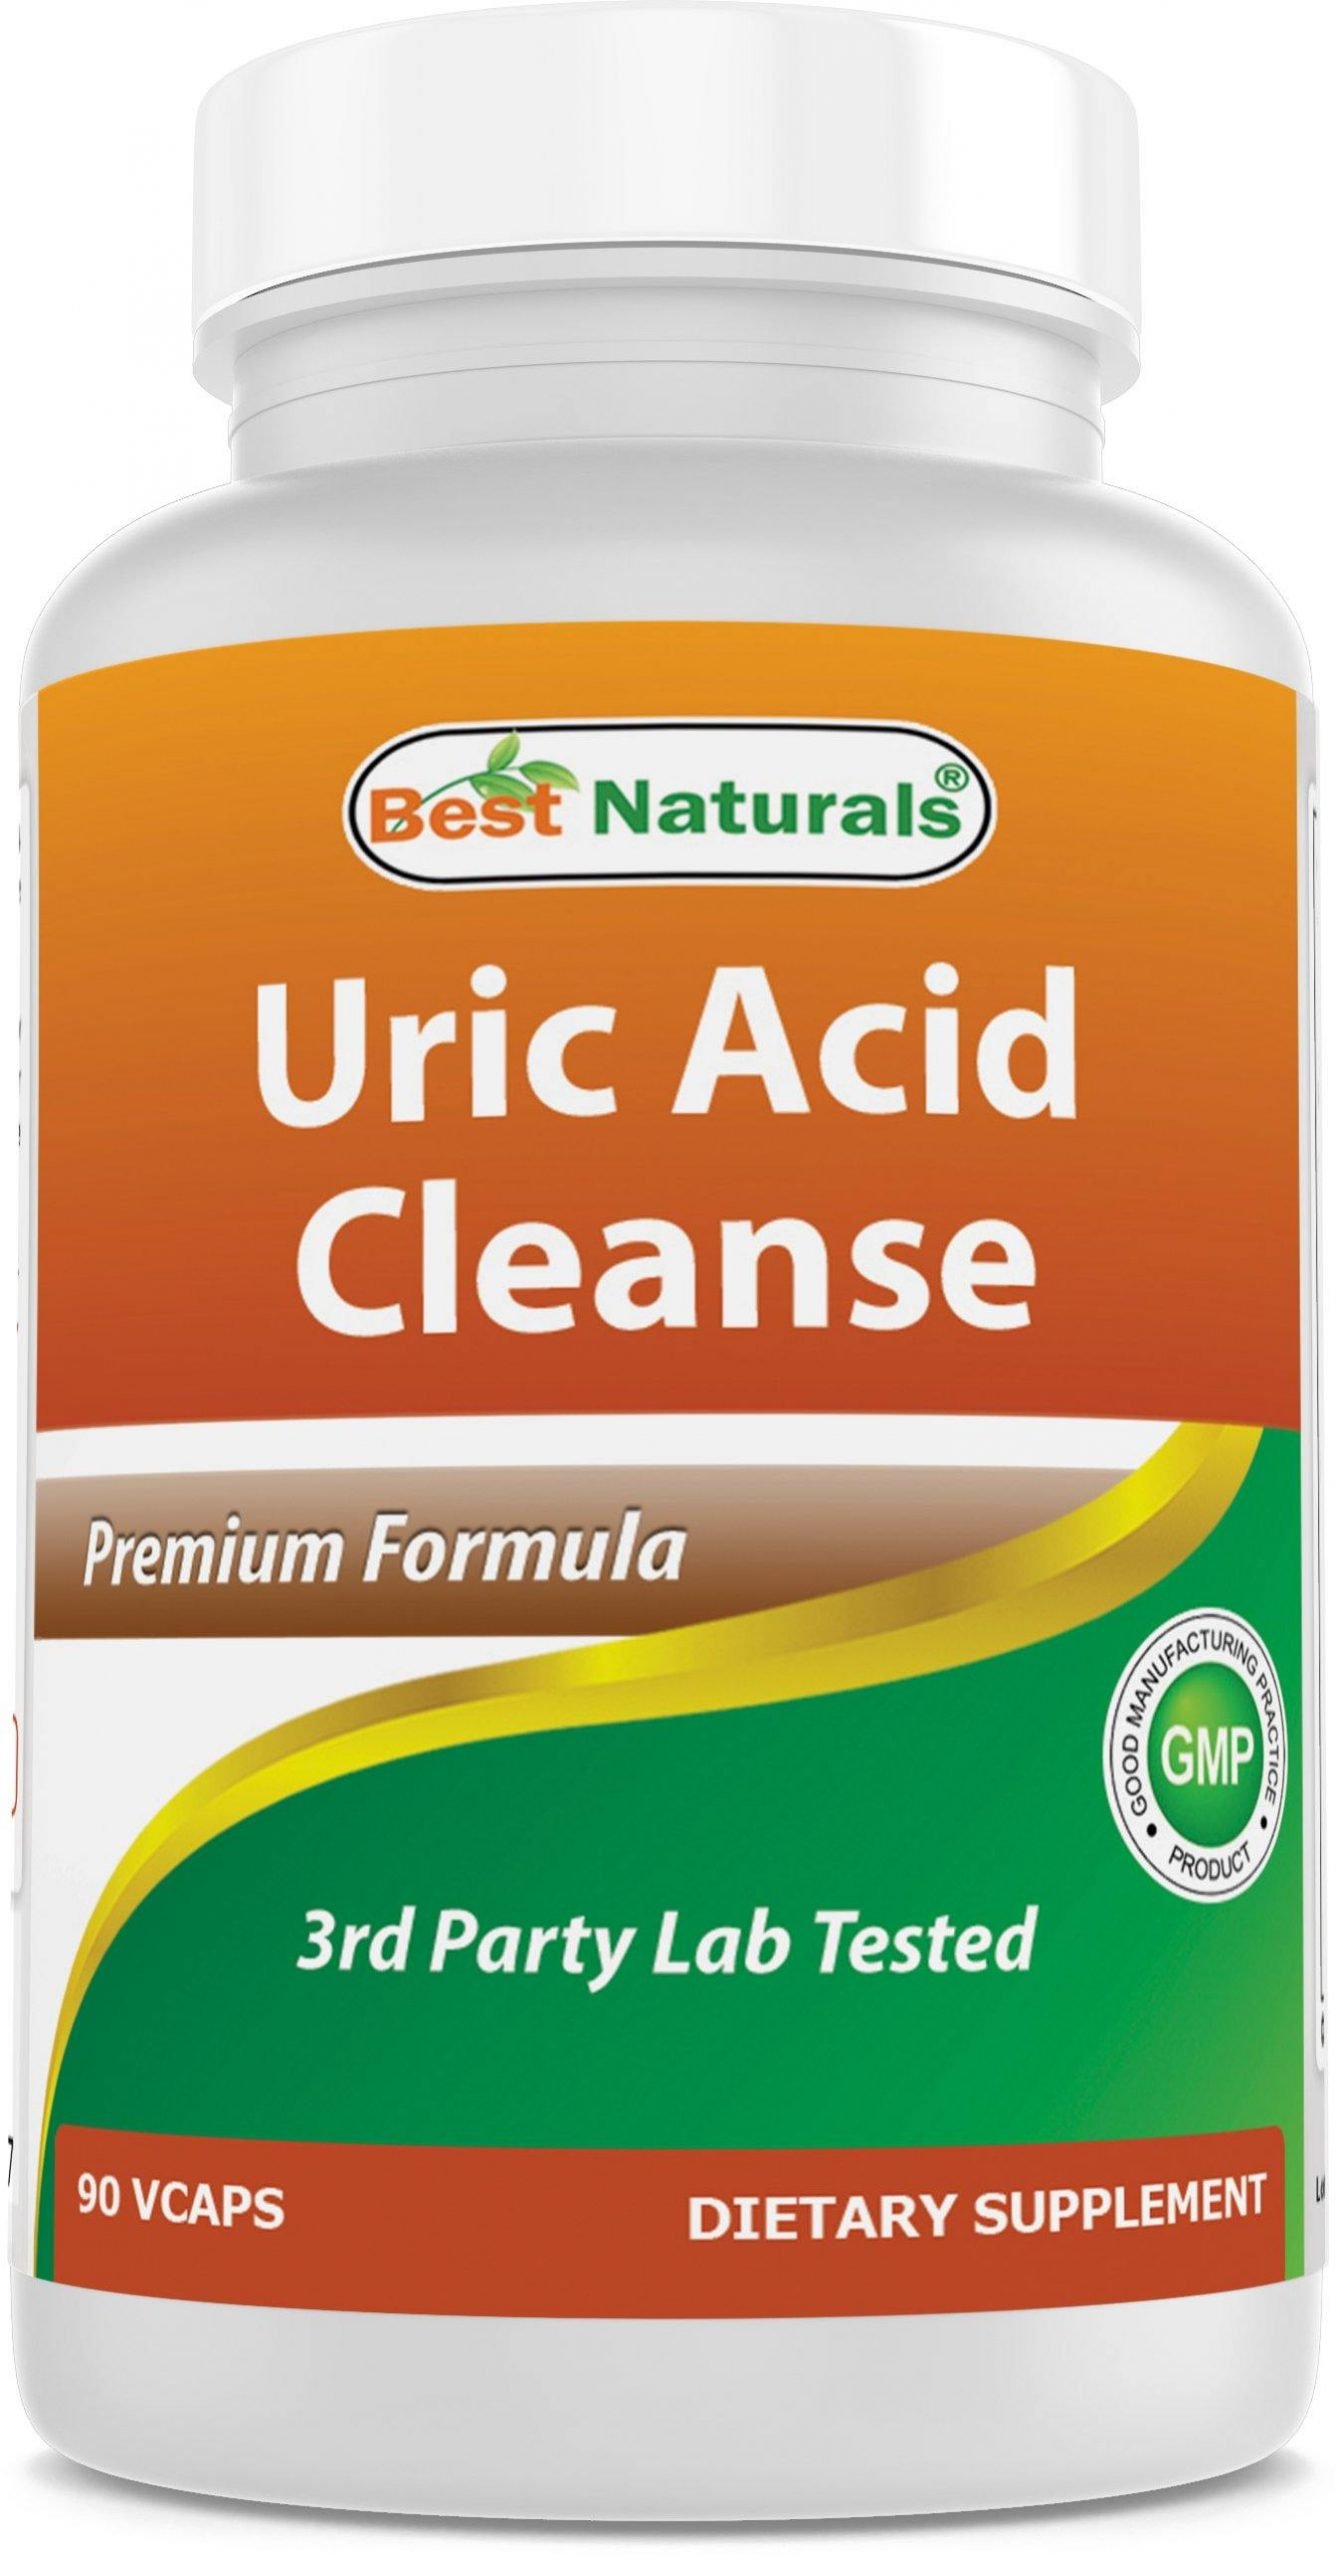 Best Naturals Uric Acid Cleanse Vitamins for Men and Women ...